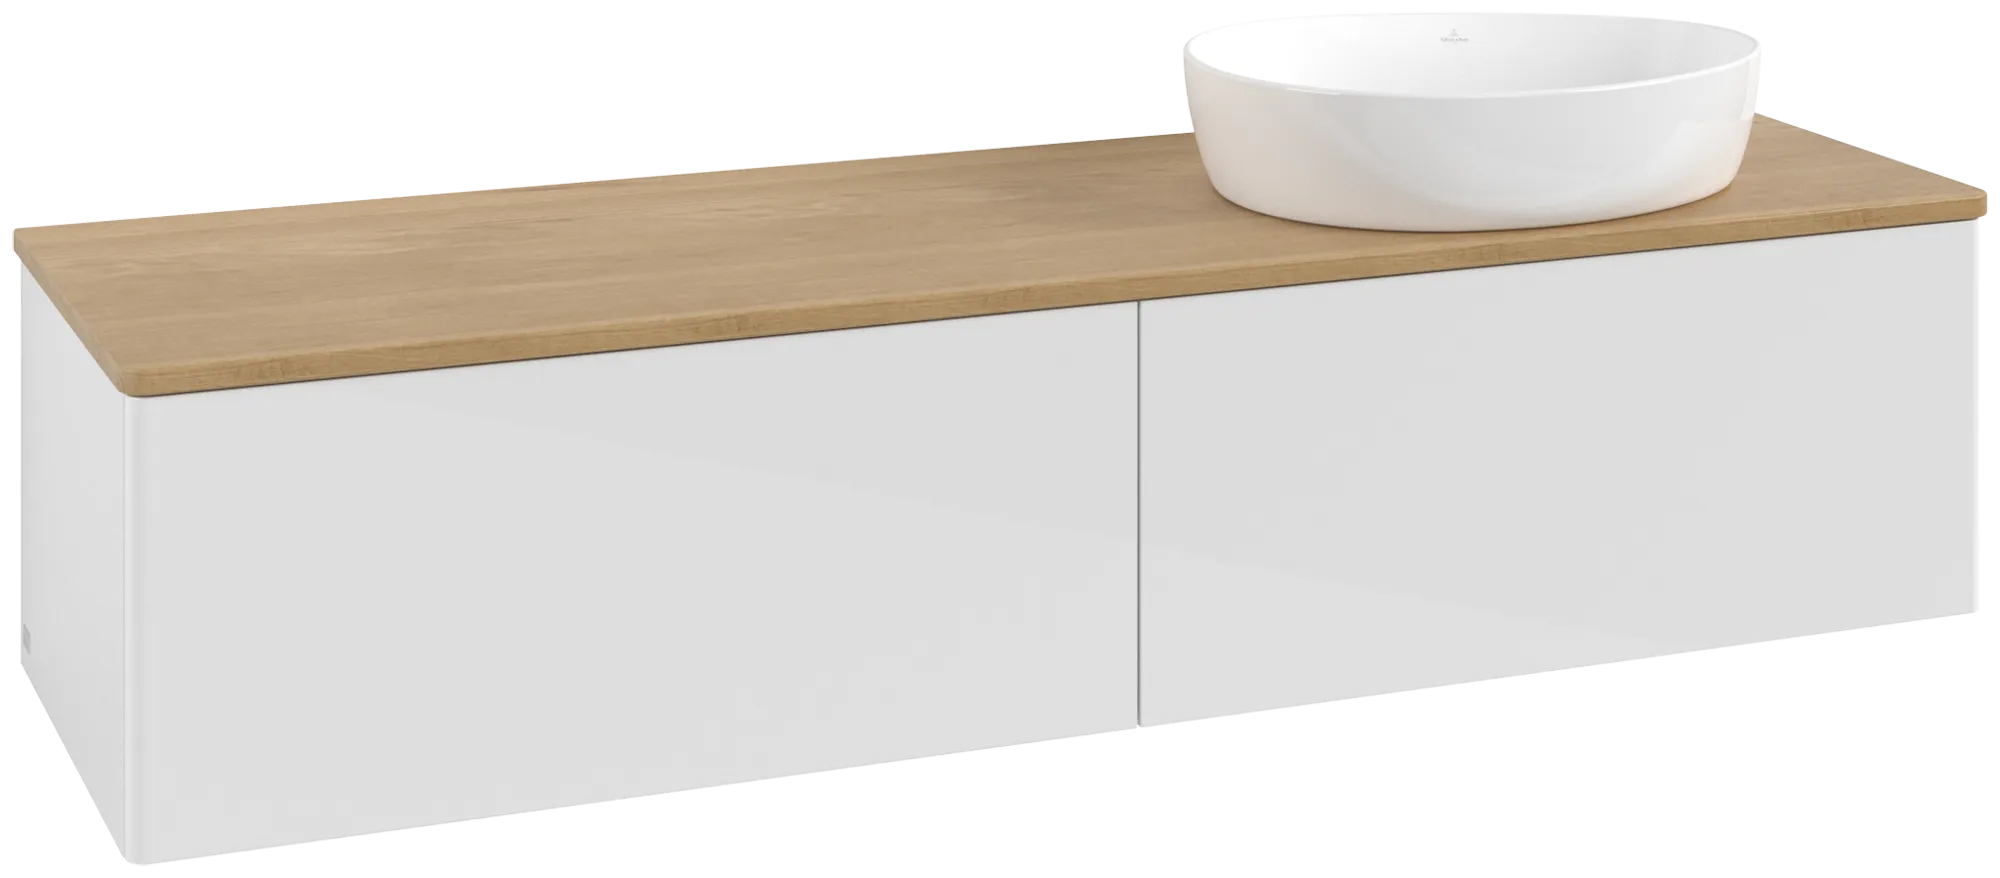 VILLEROY BOCH Antao Vanity unit, 2 pull-out compartments, 1600 x 360 x 500 mm, Front without structure, Glossy White Lacquer / Honey Oak #K38011GF resmi